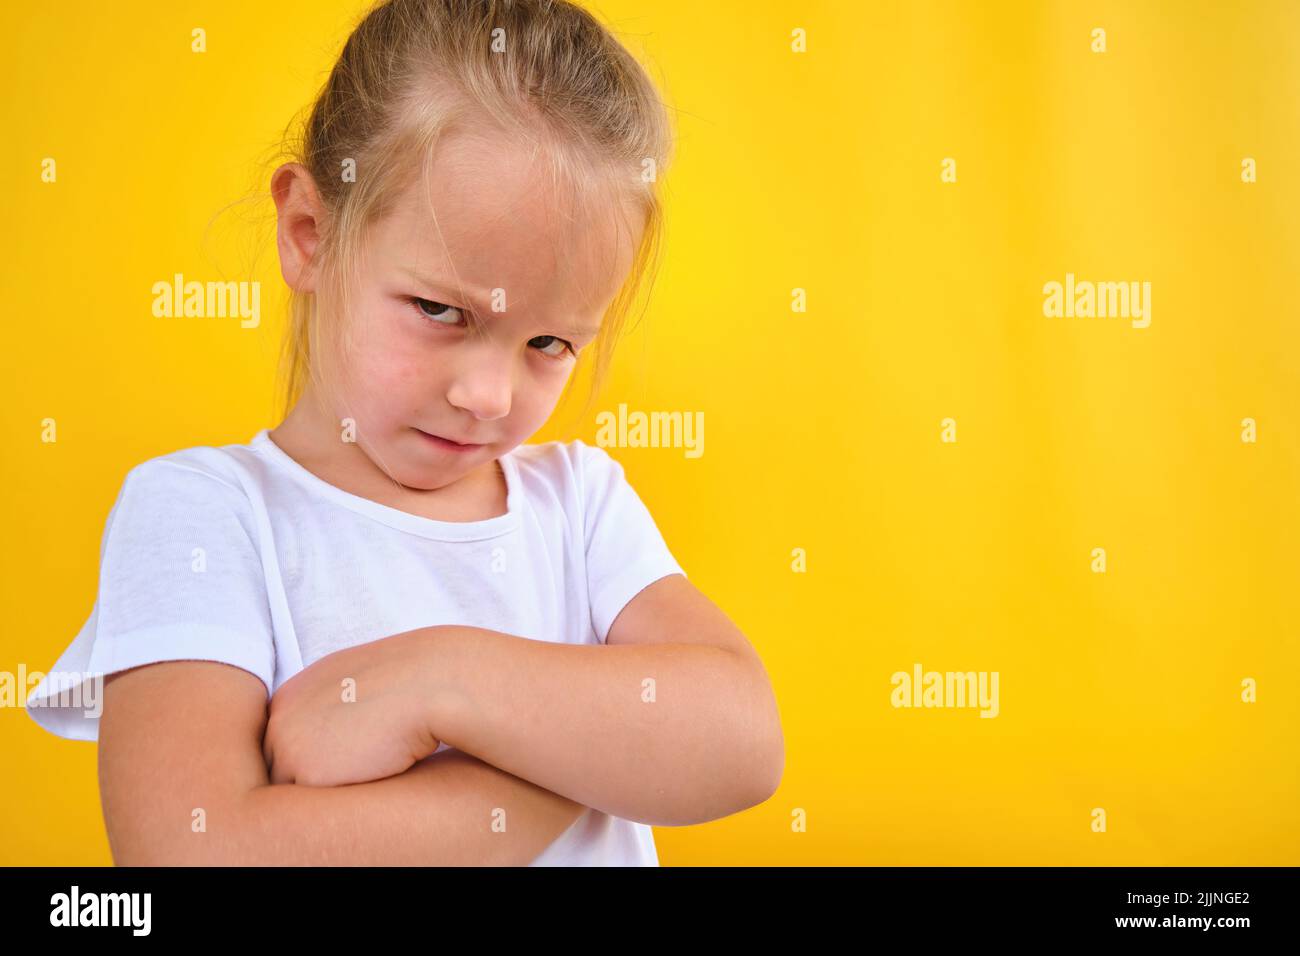 cute angry unsatisfied pre school girl arms crossed expressing disagreement Stock Photo